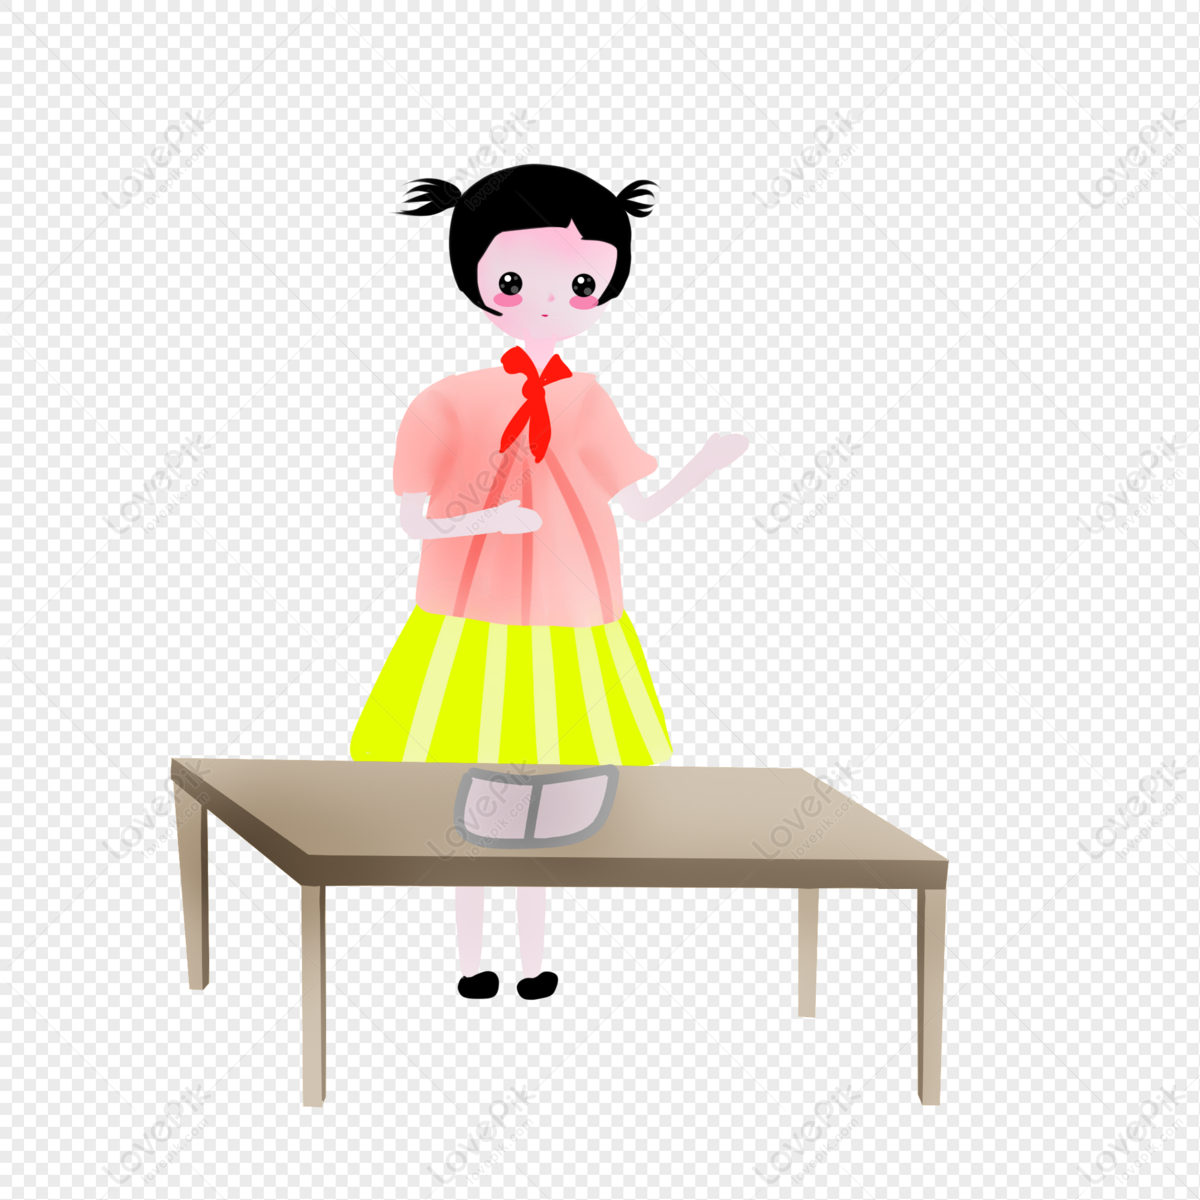 Children Who Answer Questions In Class PNG Transparent And Clipart Image  For Free Download - Lovepik | 401332846